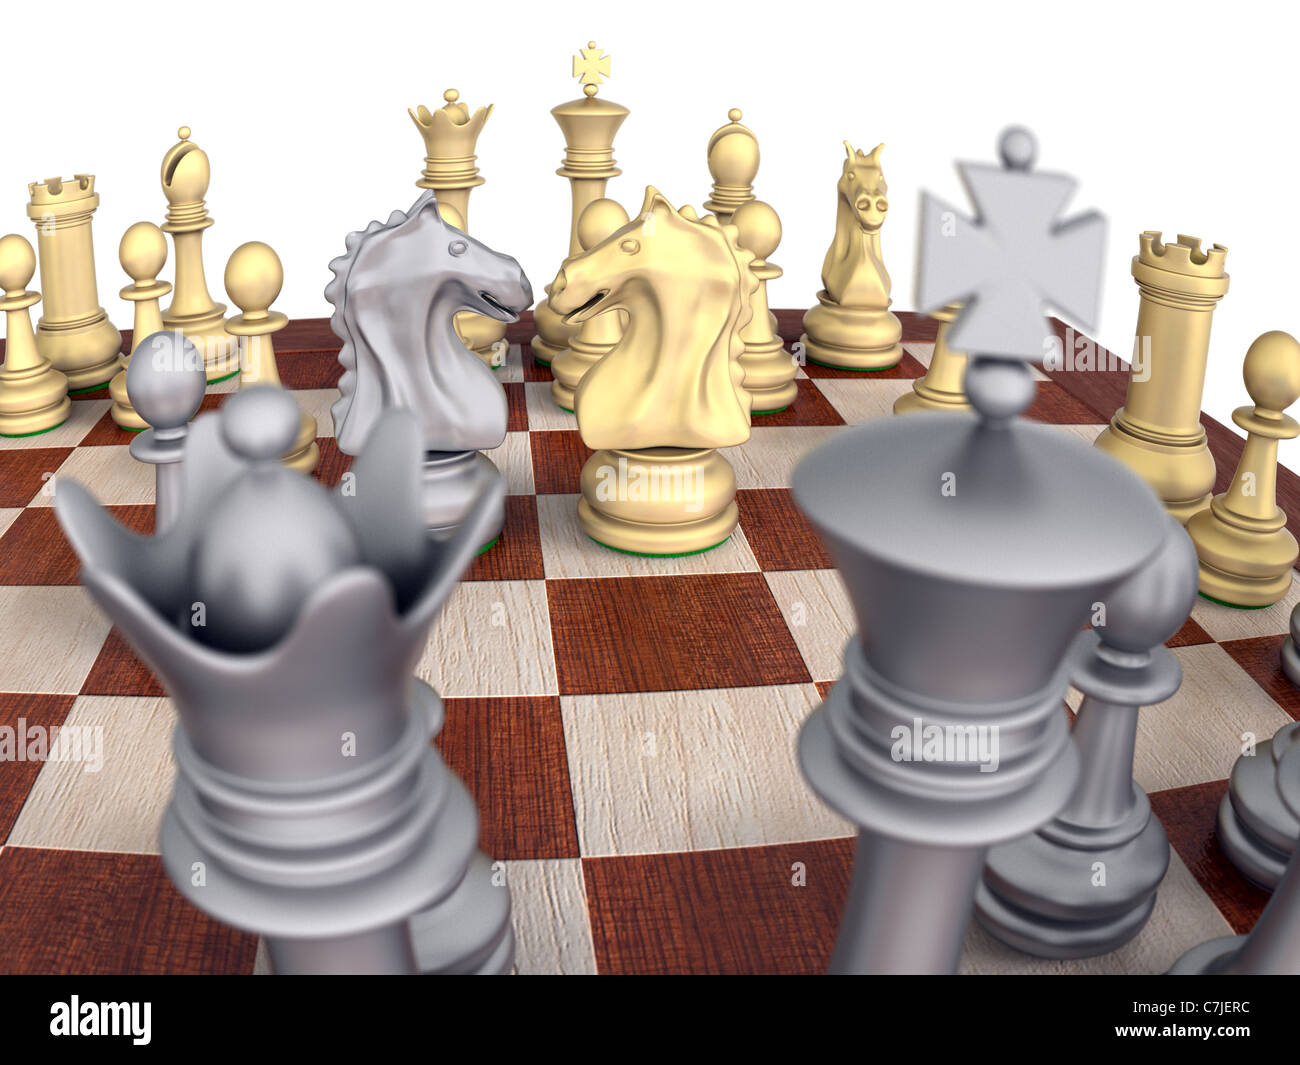 Close-Up of a metal chess set on a wooden board, isolated over white with knights confronting. Stock Photo